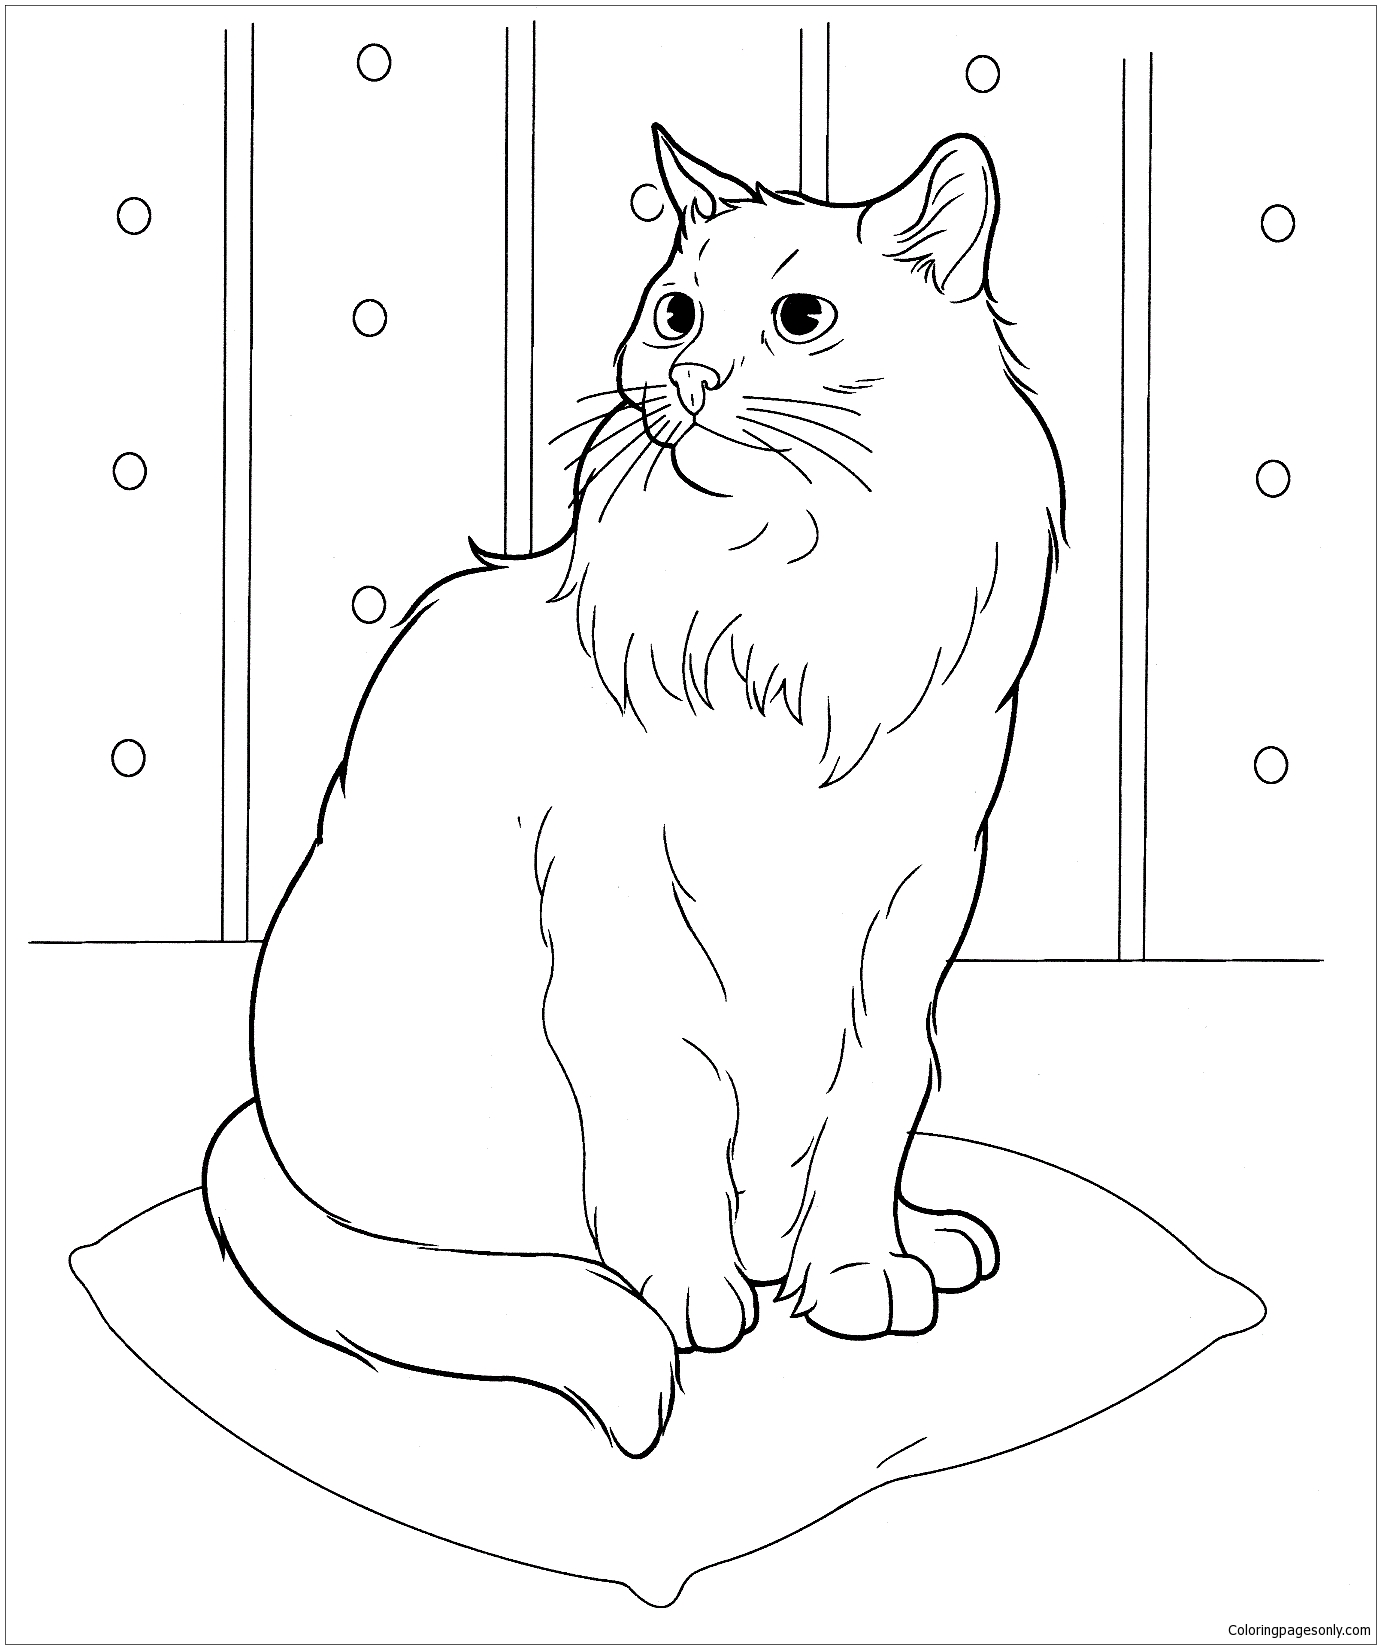 Siberian Cat Coloring Page